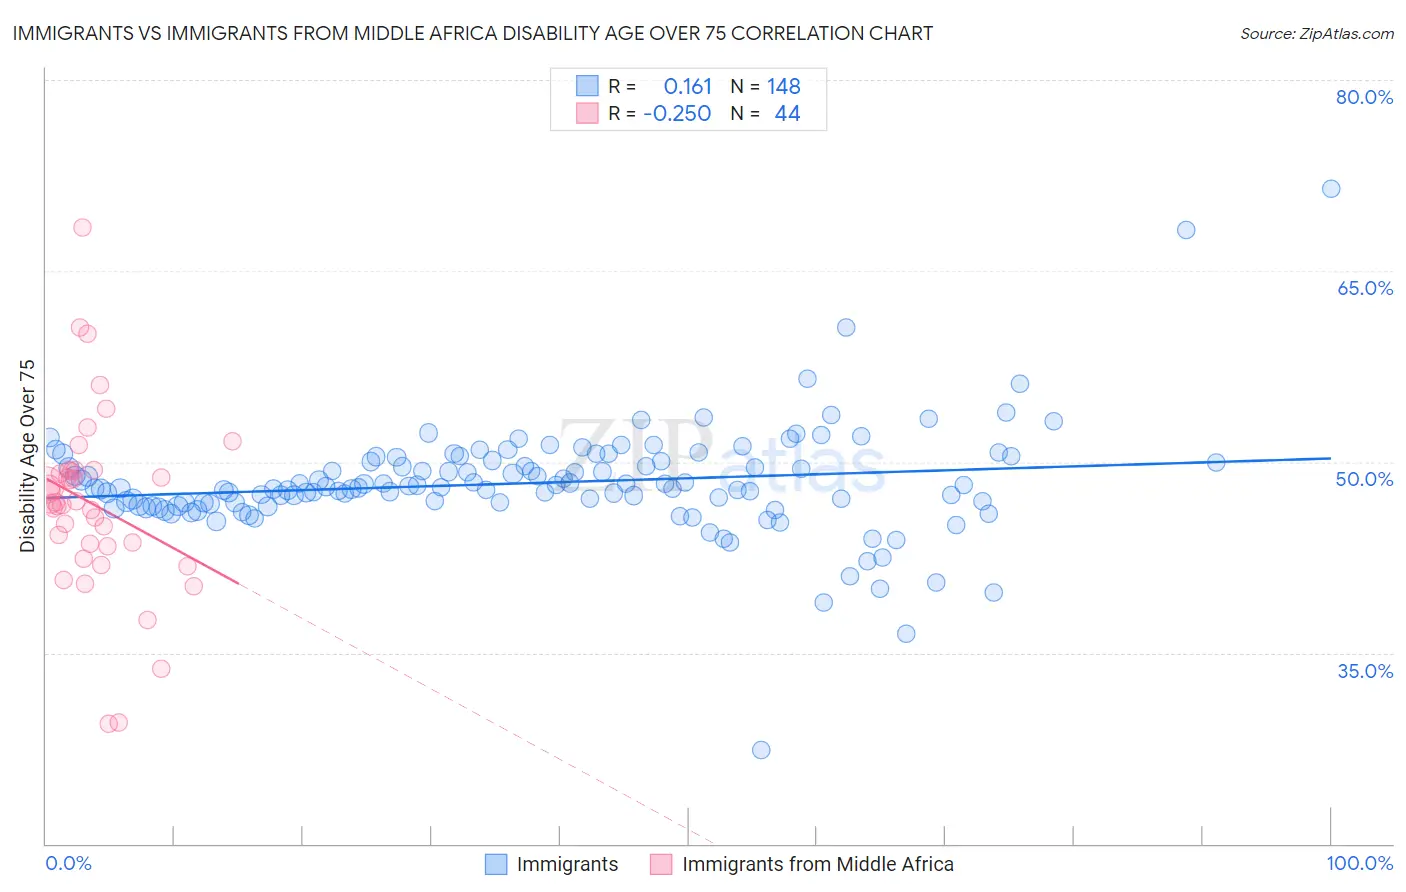 Immigrants vs Immigrants from Middle Africa Disability Age Over 75